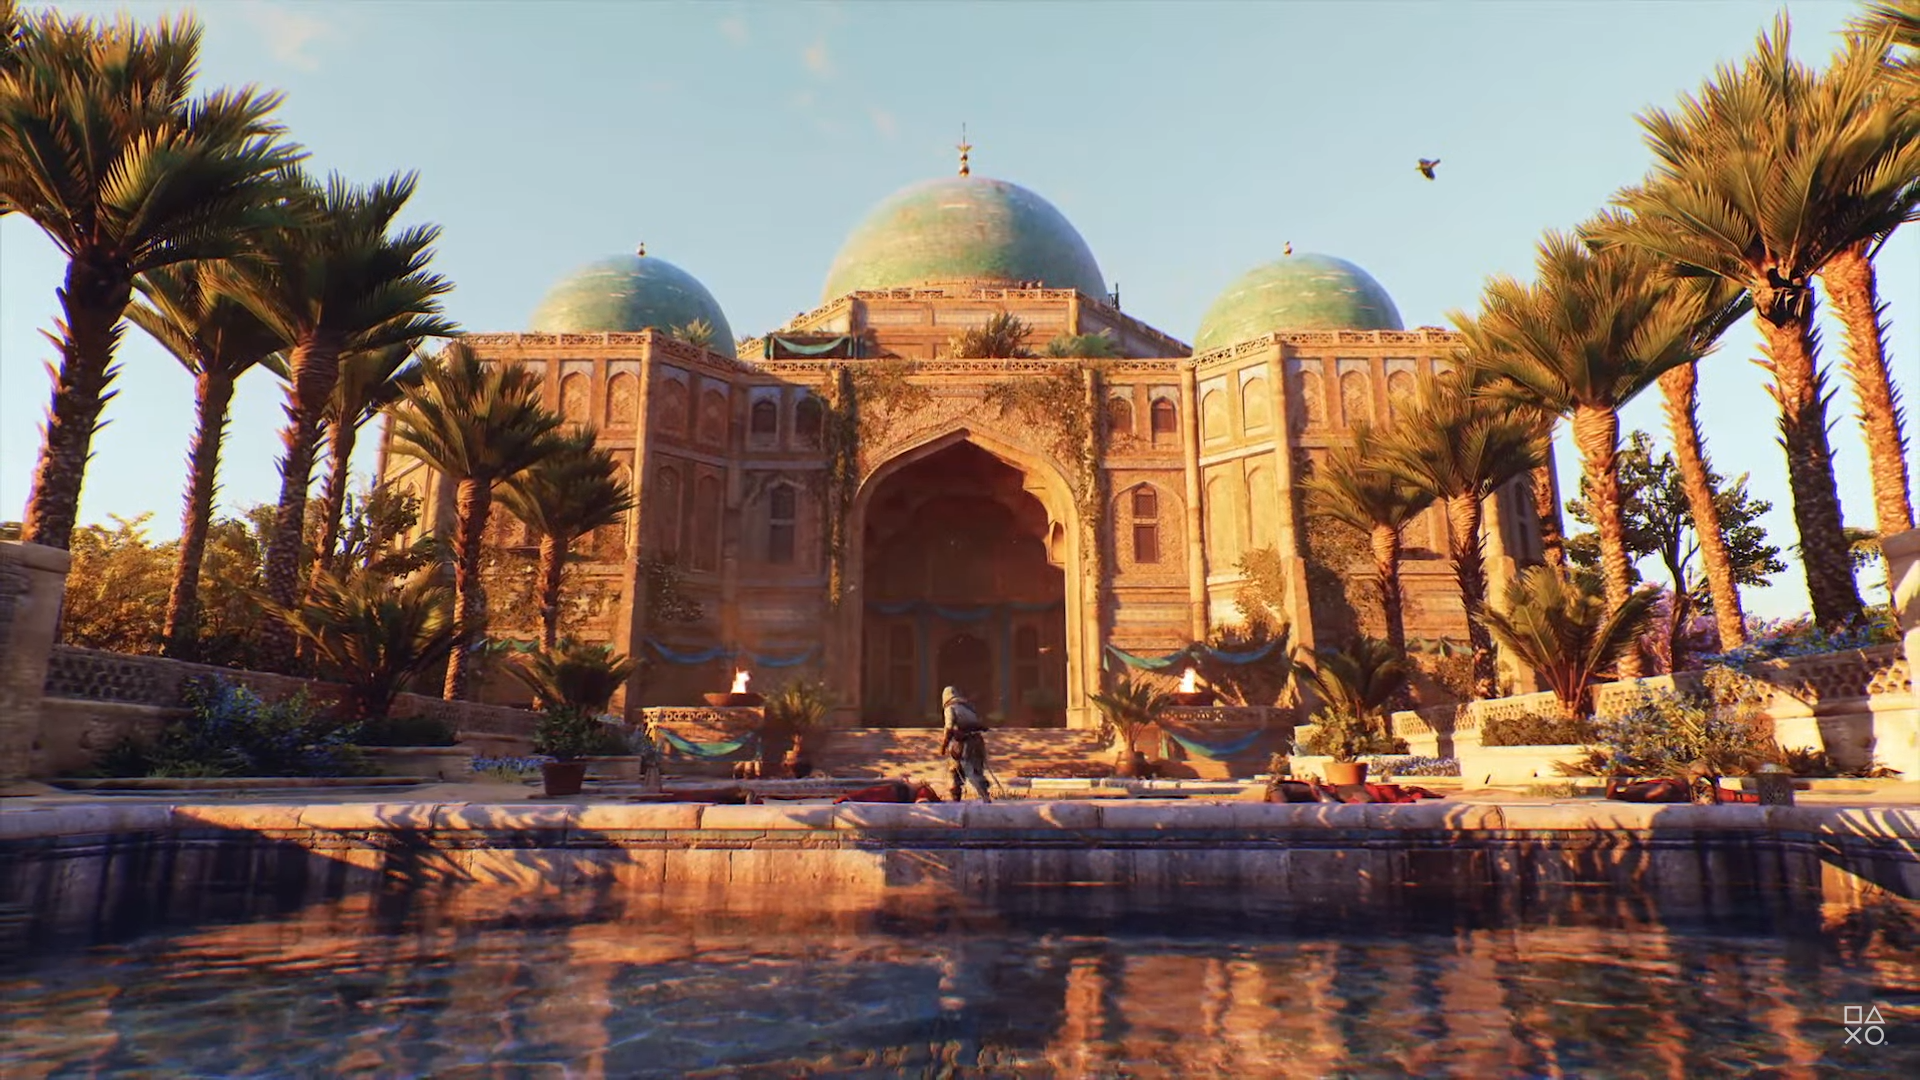 Assassin's Creed Mirage: Release Time